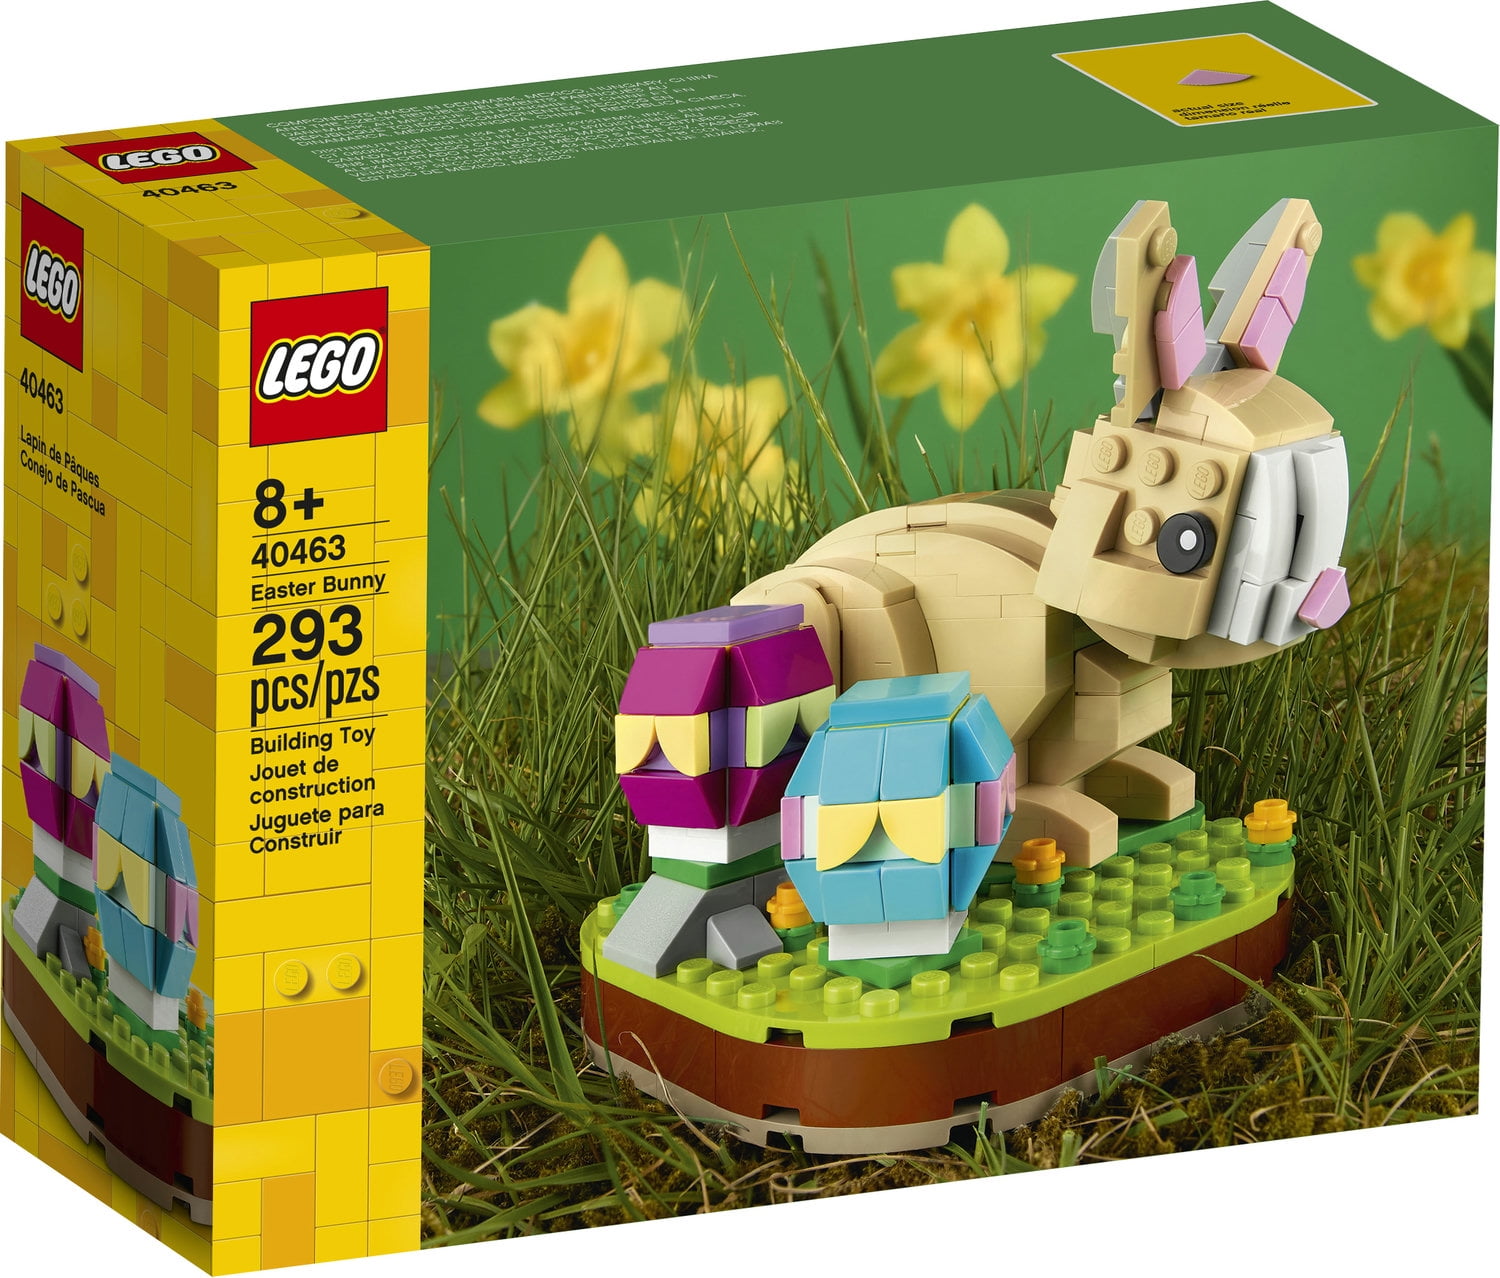 Lot of 2 New Lego 30550 Easter Bunny 